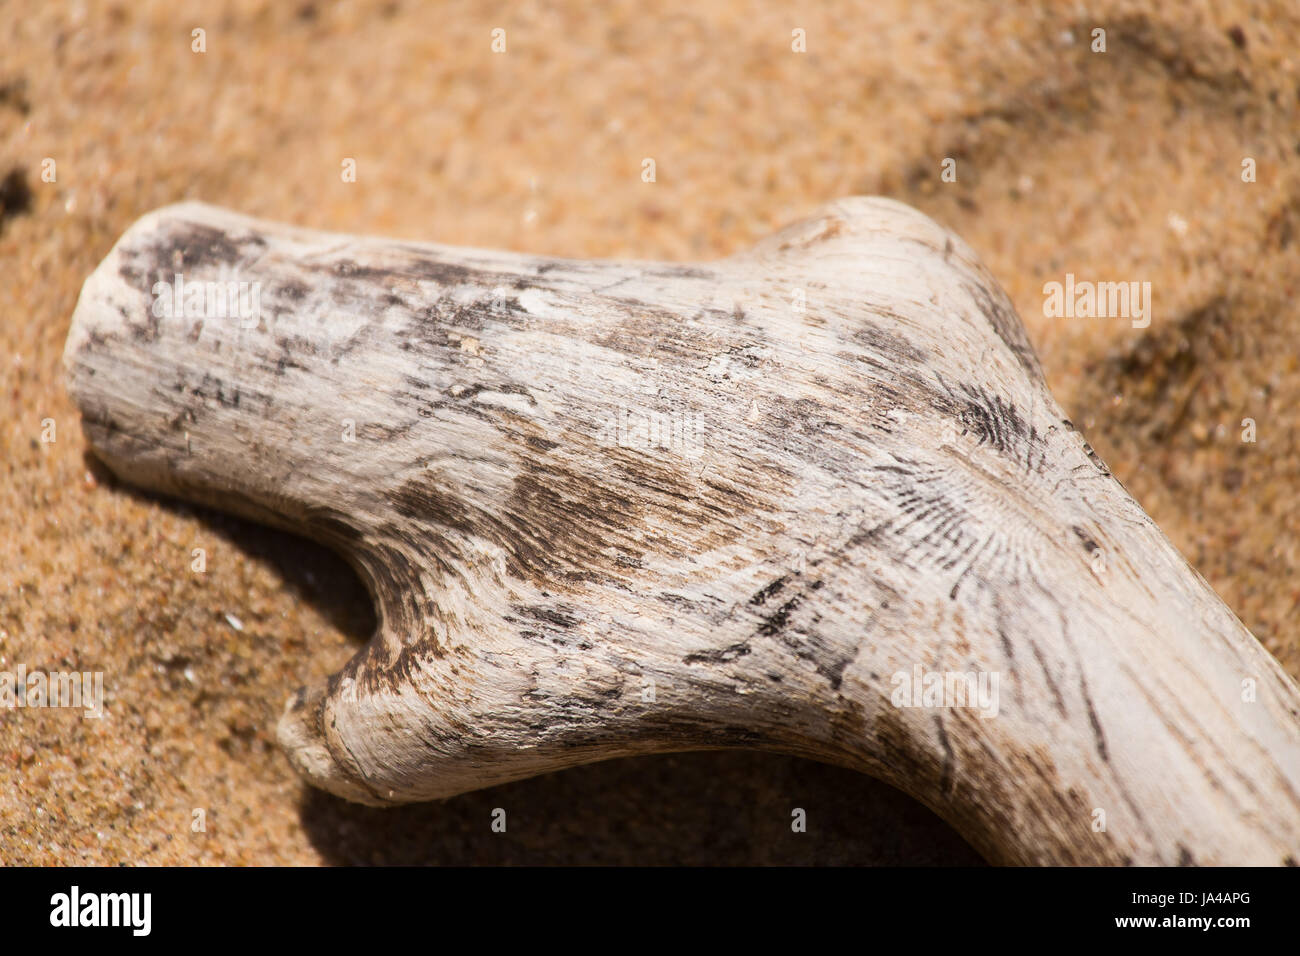 An abstract background of a sea sand and rock shapes. Shallow depth of field. Stock Photo